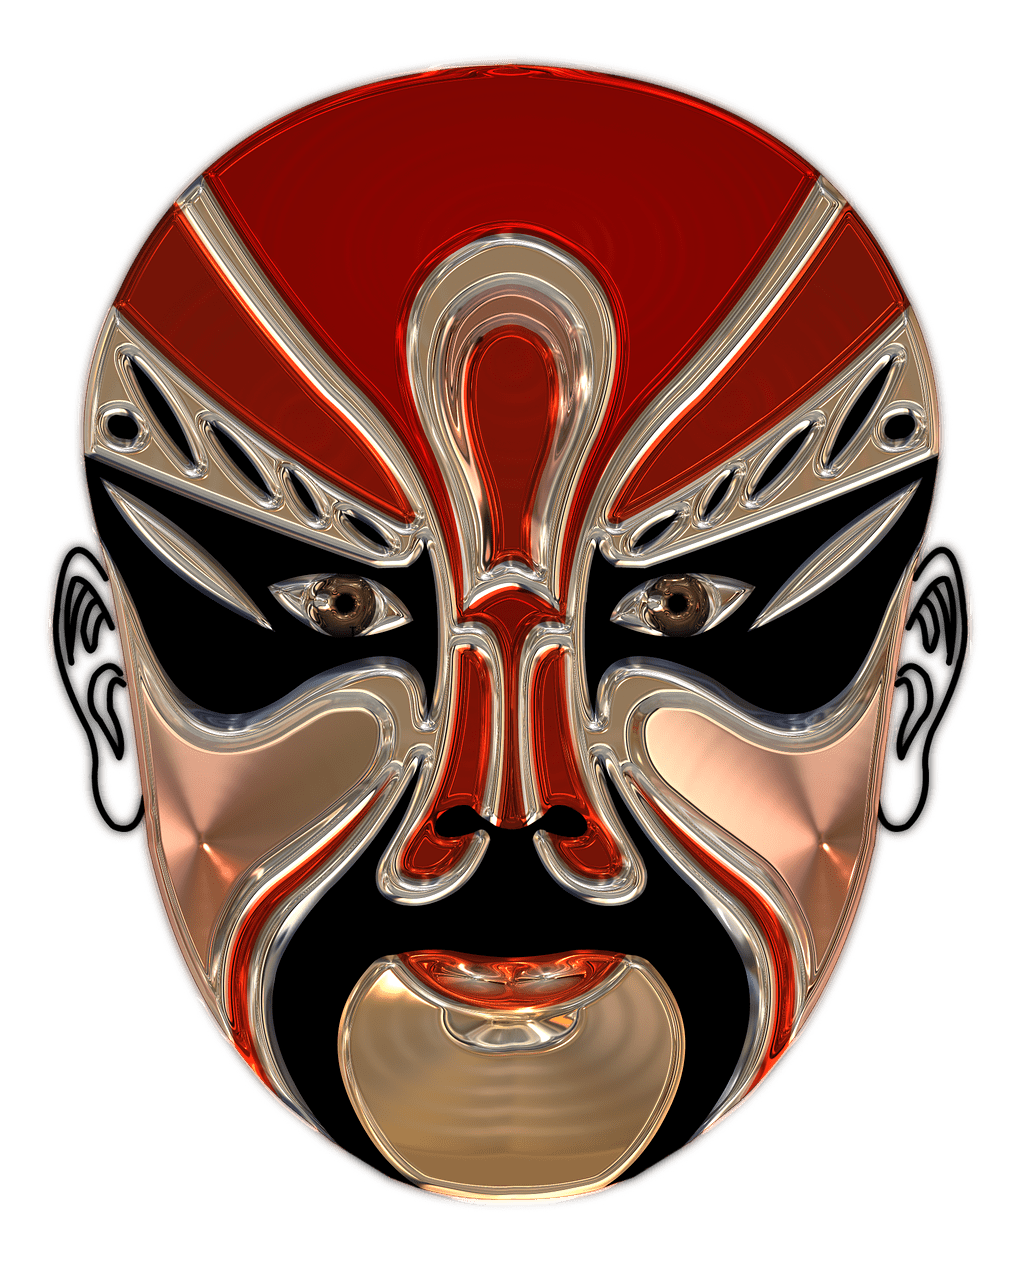 Chinese Opera Red Mask PNG images